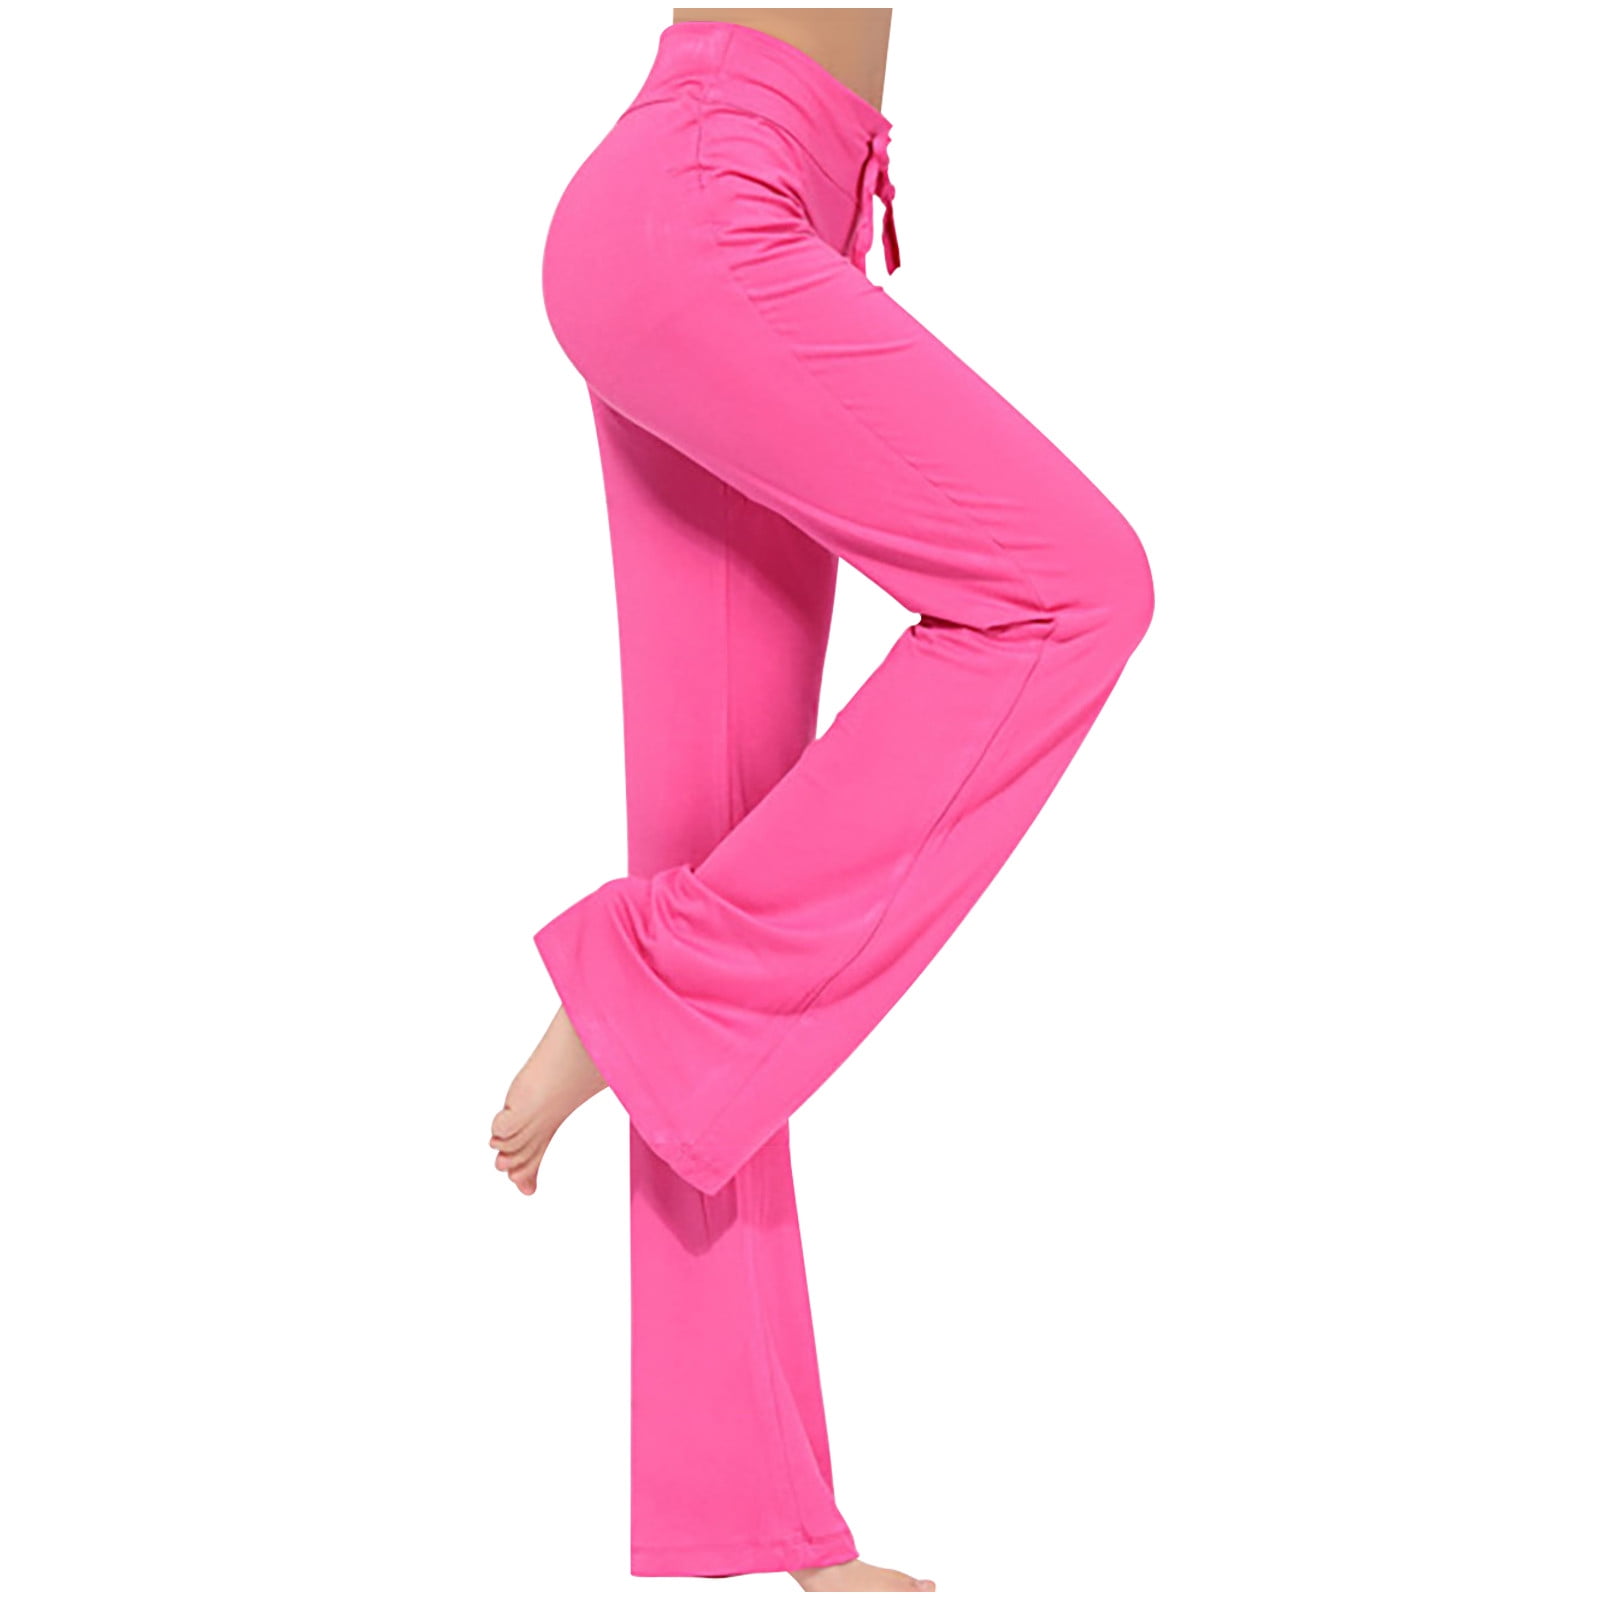 Women's Yoga Sweatpants Cozy Pants Wide Leg Drawstring High Waisted Comfy  Casual Athletic Lounge Bootcut Flare Trousers (S, Hot Pink-M) 